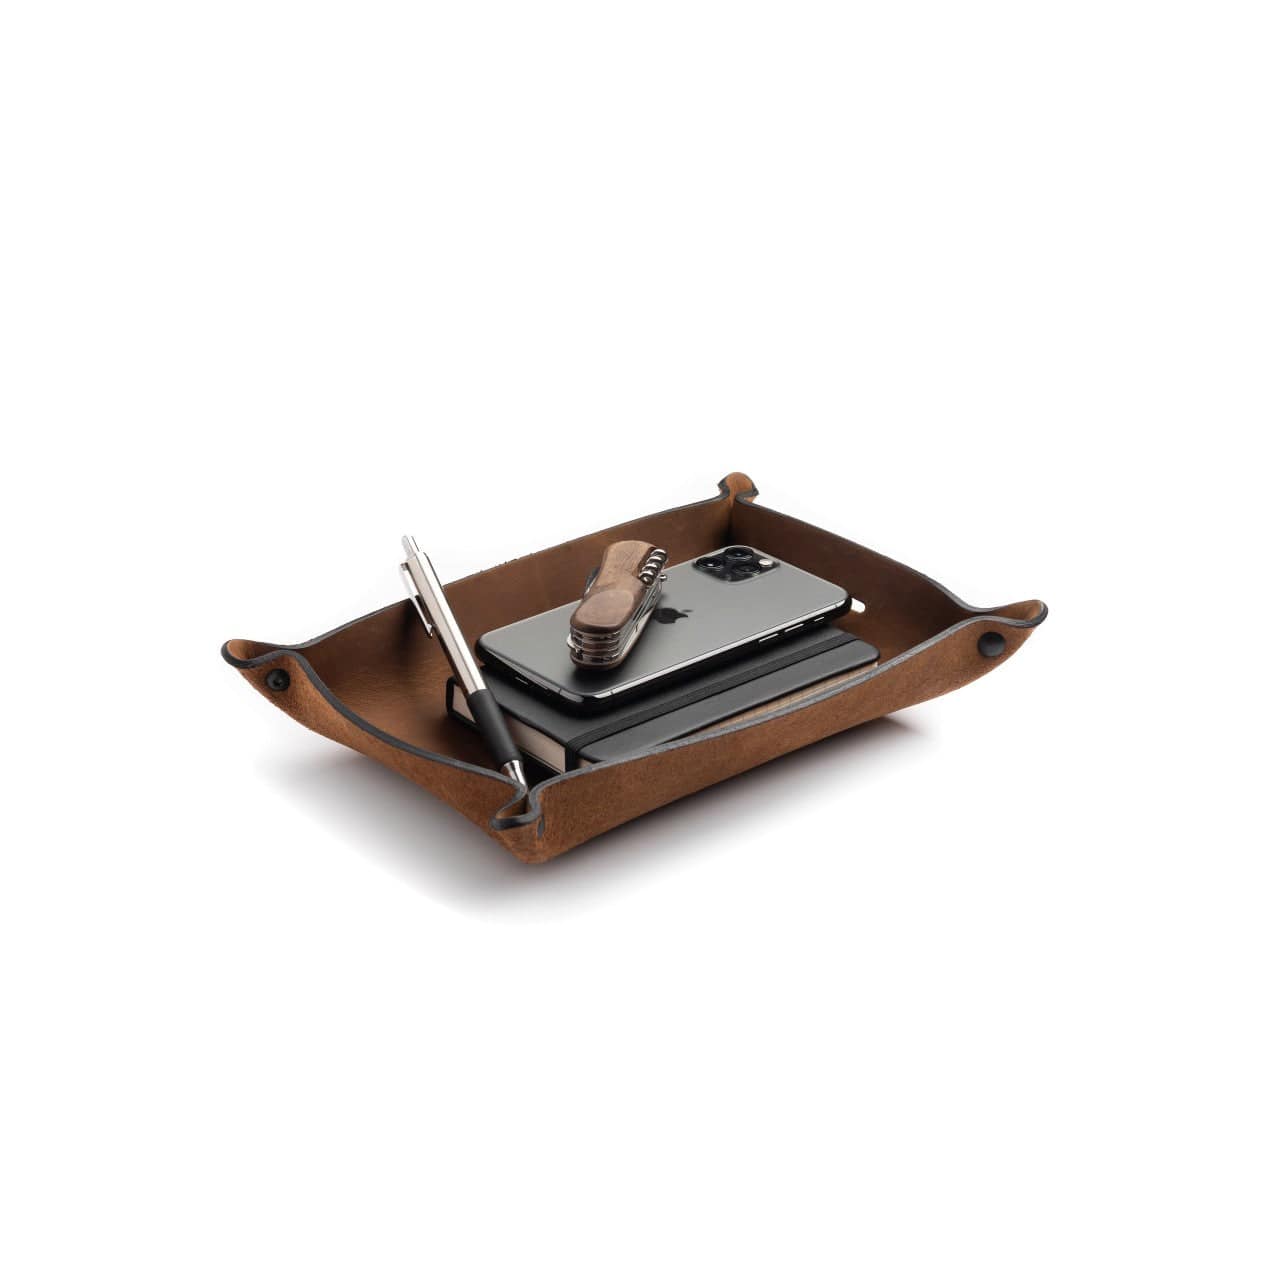 https://mainstreetforge.com/cdn/shop/products/full-grain-leather-valet-tray-charging-station-for-nightstand-table-bedroom-kitchen-office-main-street-forge-small-goods-large-rustic-montana-37722063601889_1600x.jpg?v=1657126698